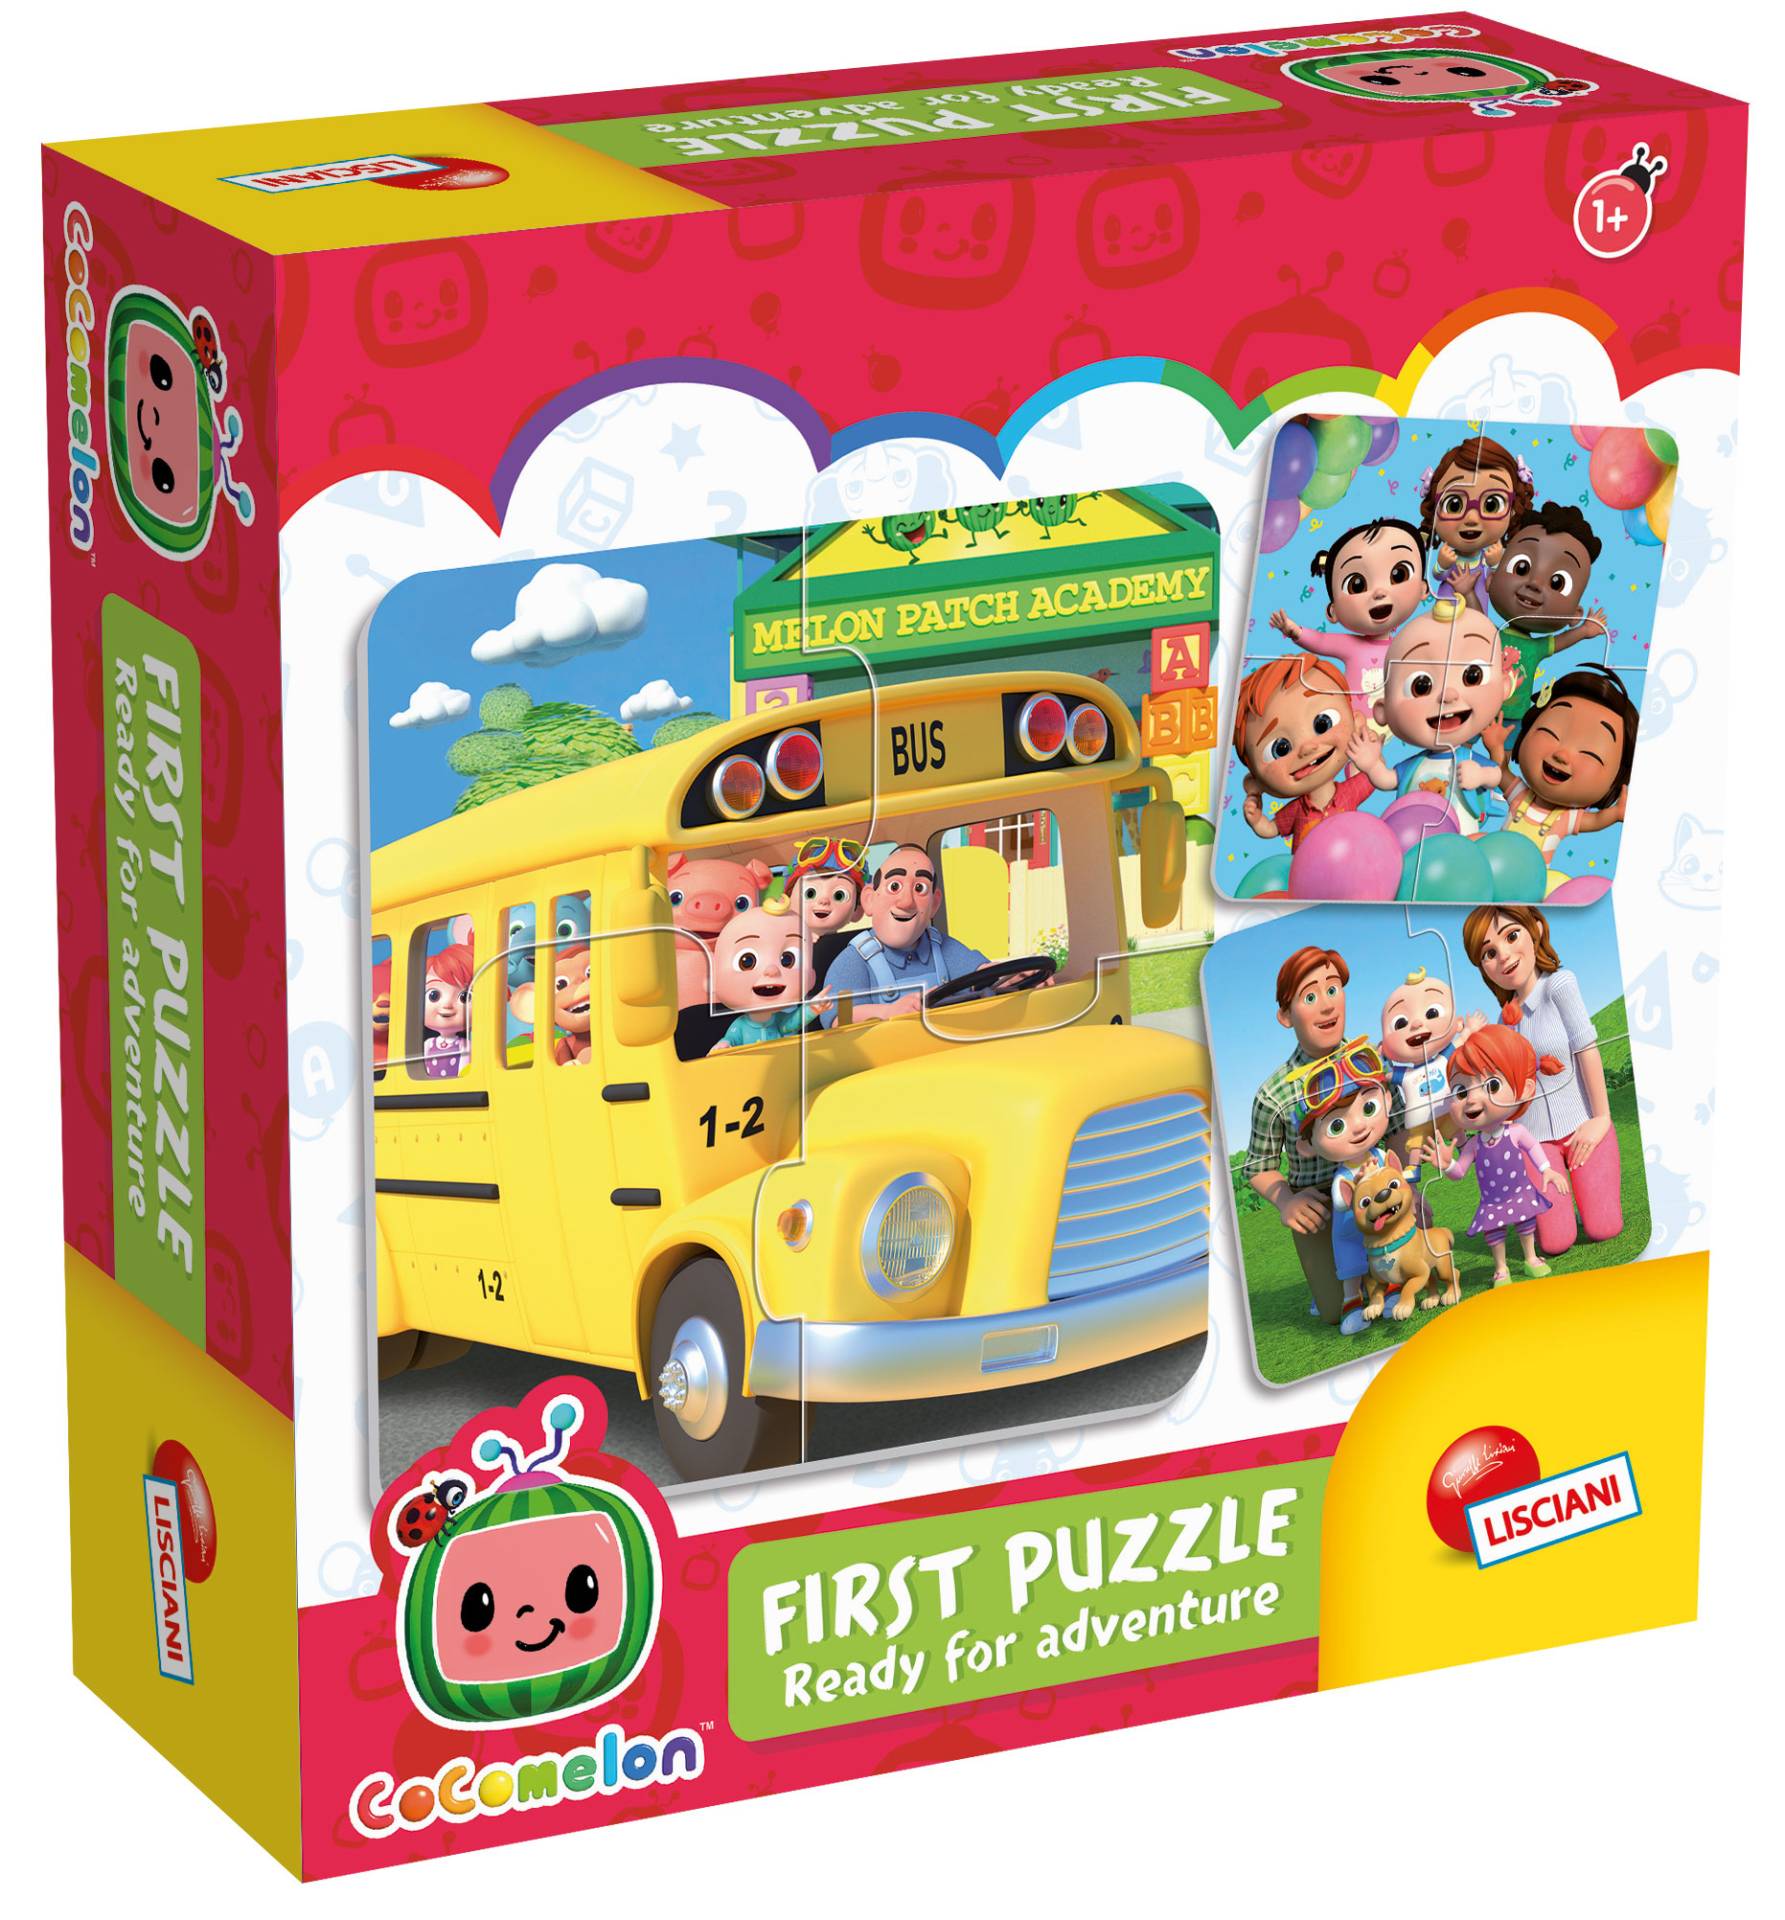 Foto 1 des Spiels COCOMELON FIRST PUZZLE READY FOR ADVENTURE